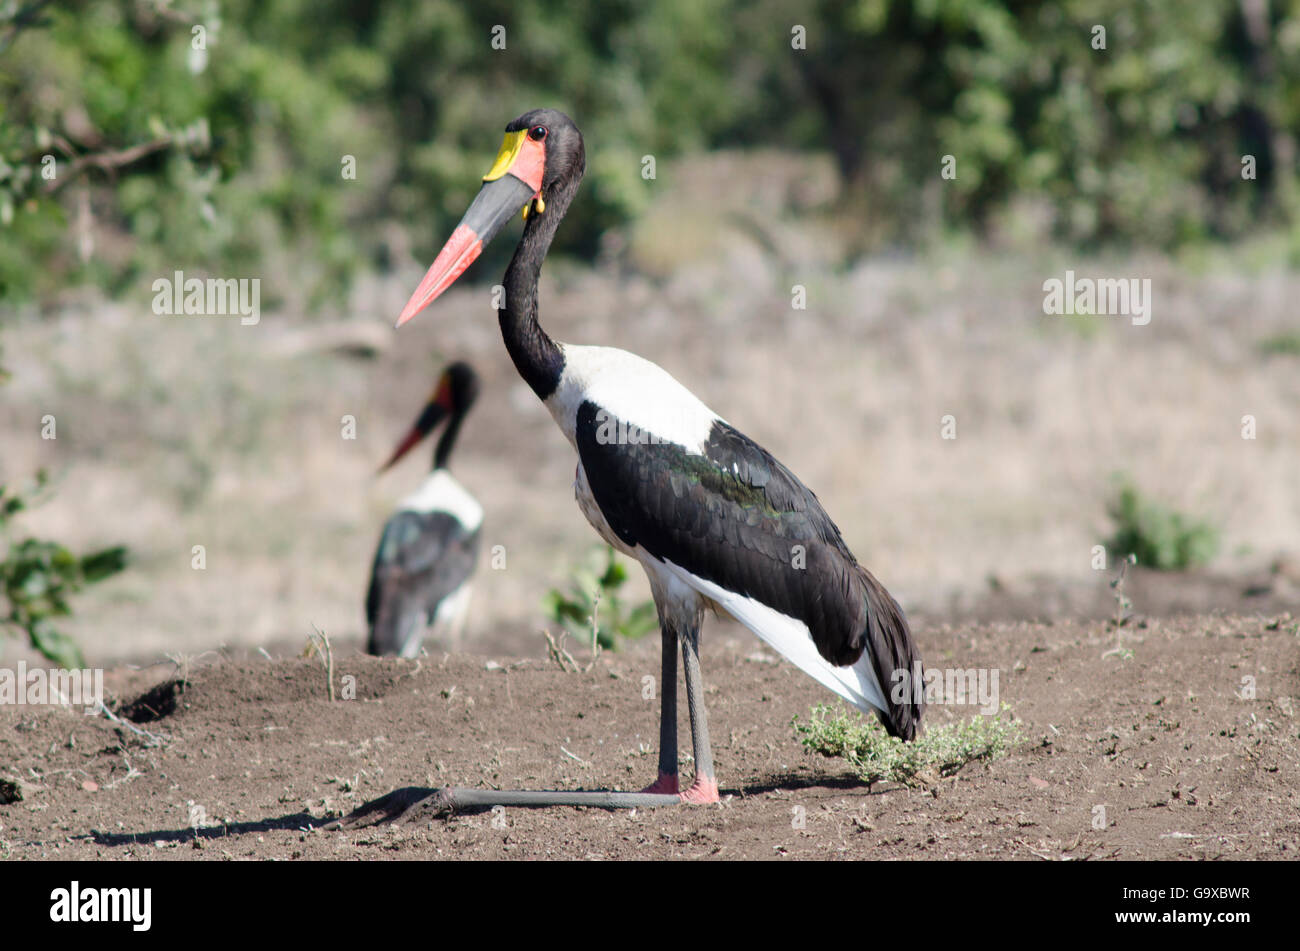 Pair of Saddle-billed storks at rest, Male in the foreground. Stock Photo